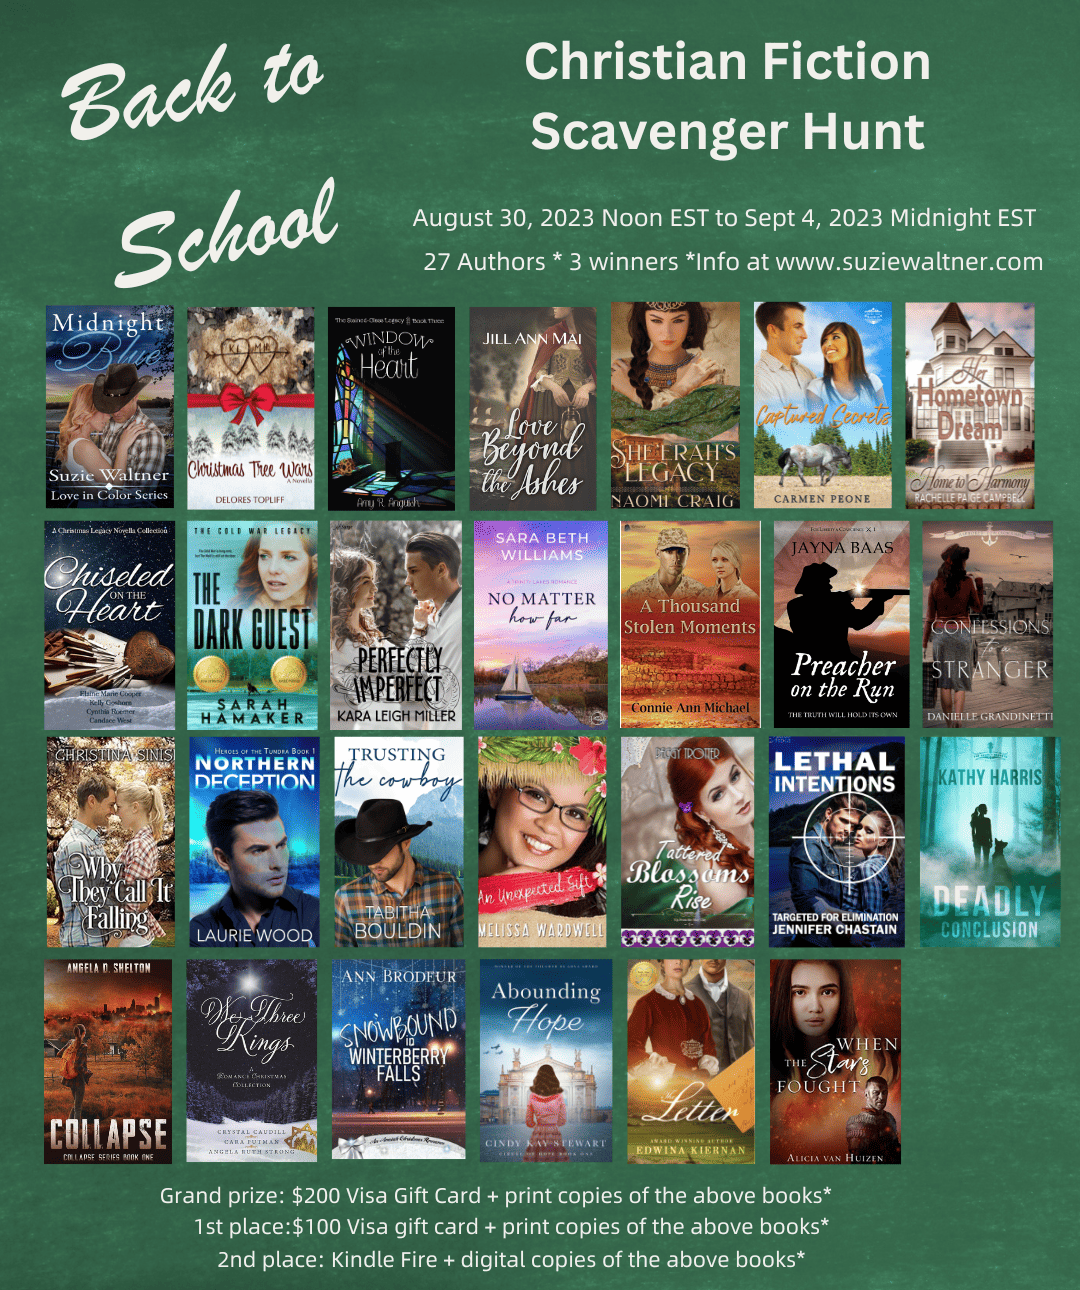 A Back to School Christian Fiction Scavenger Hunt for You! Stop 6